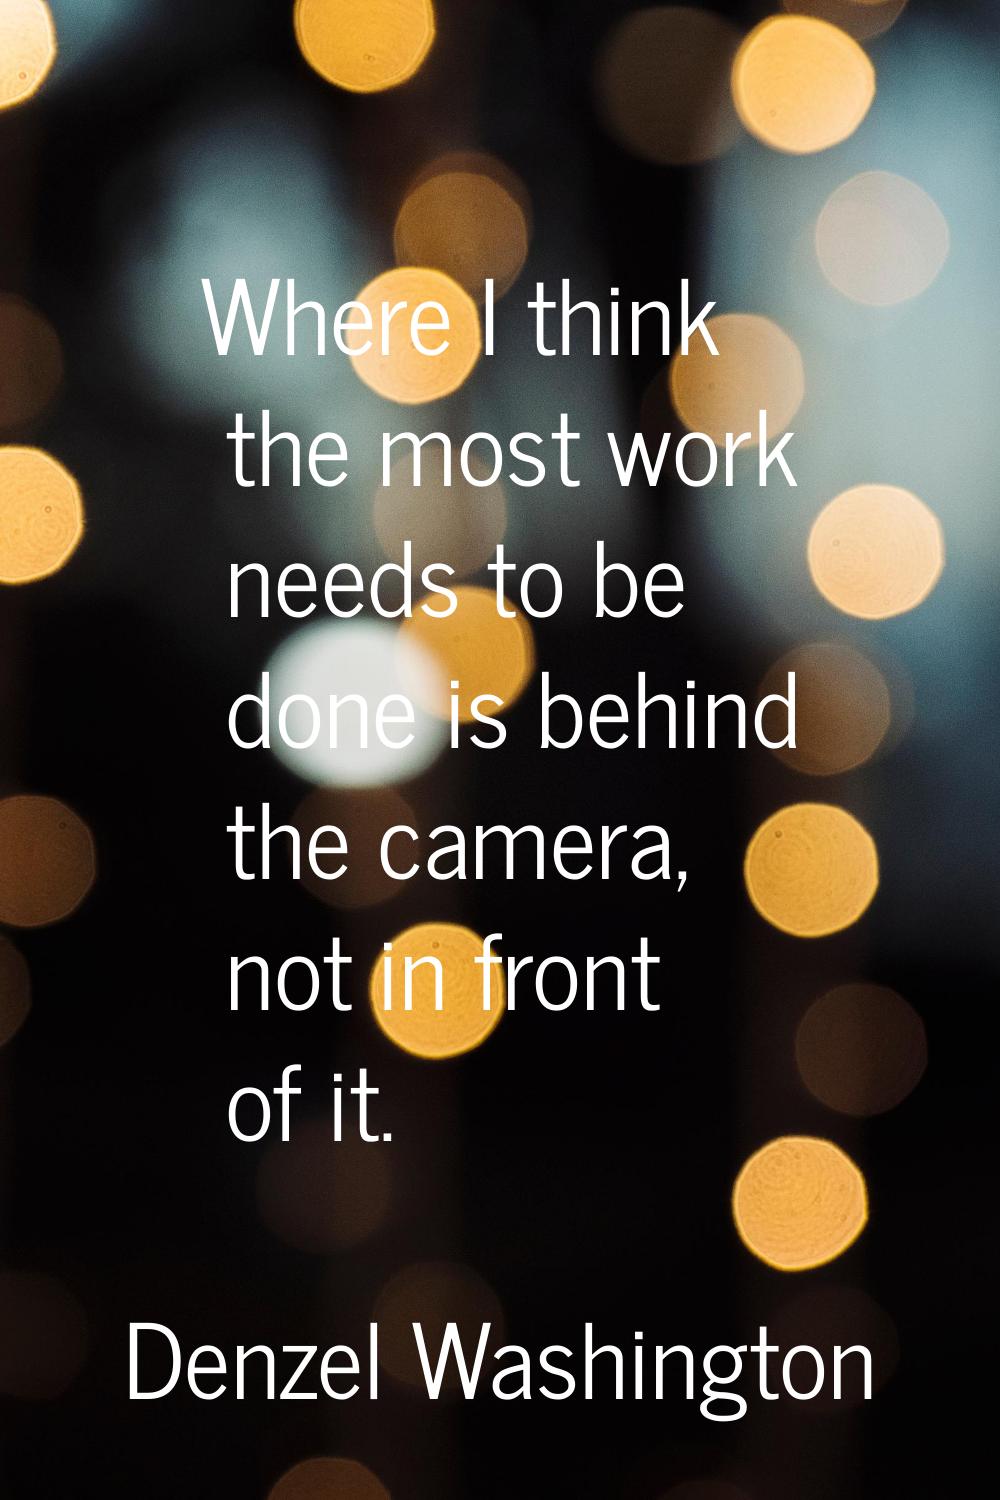 Where I think the most work needs to be done is behind the camera, not in front of it.